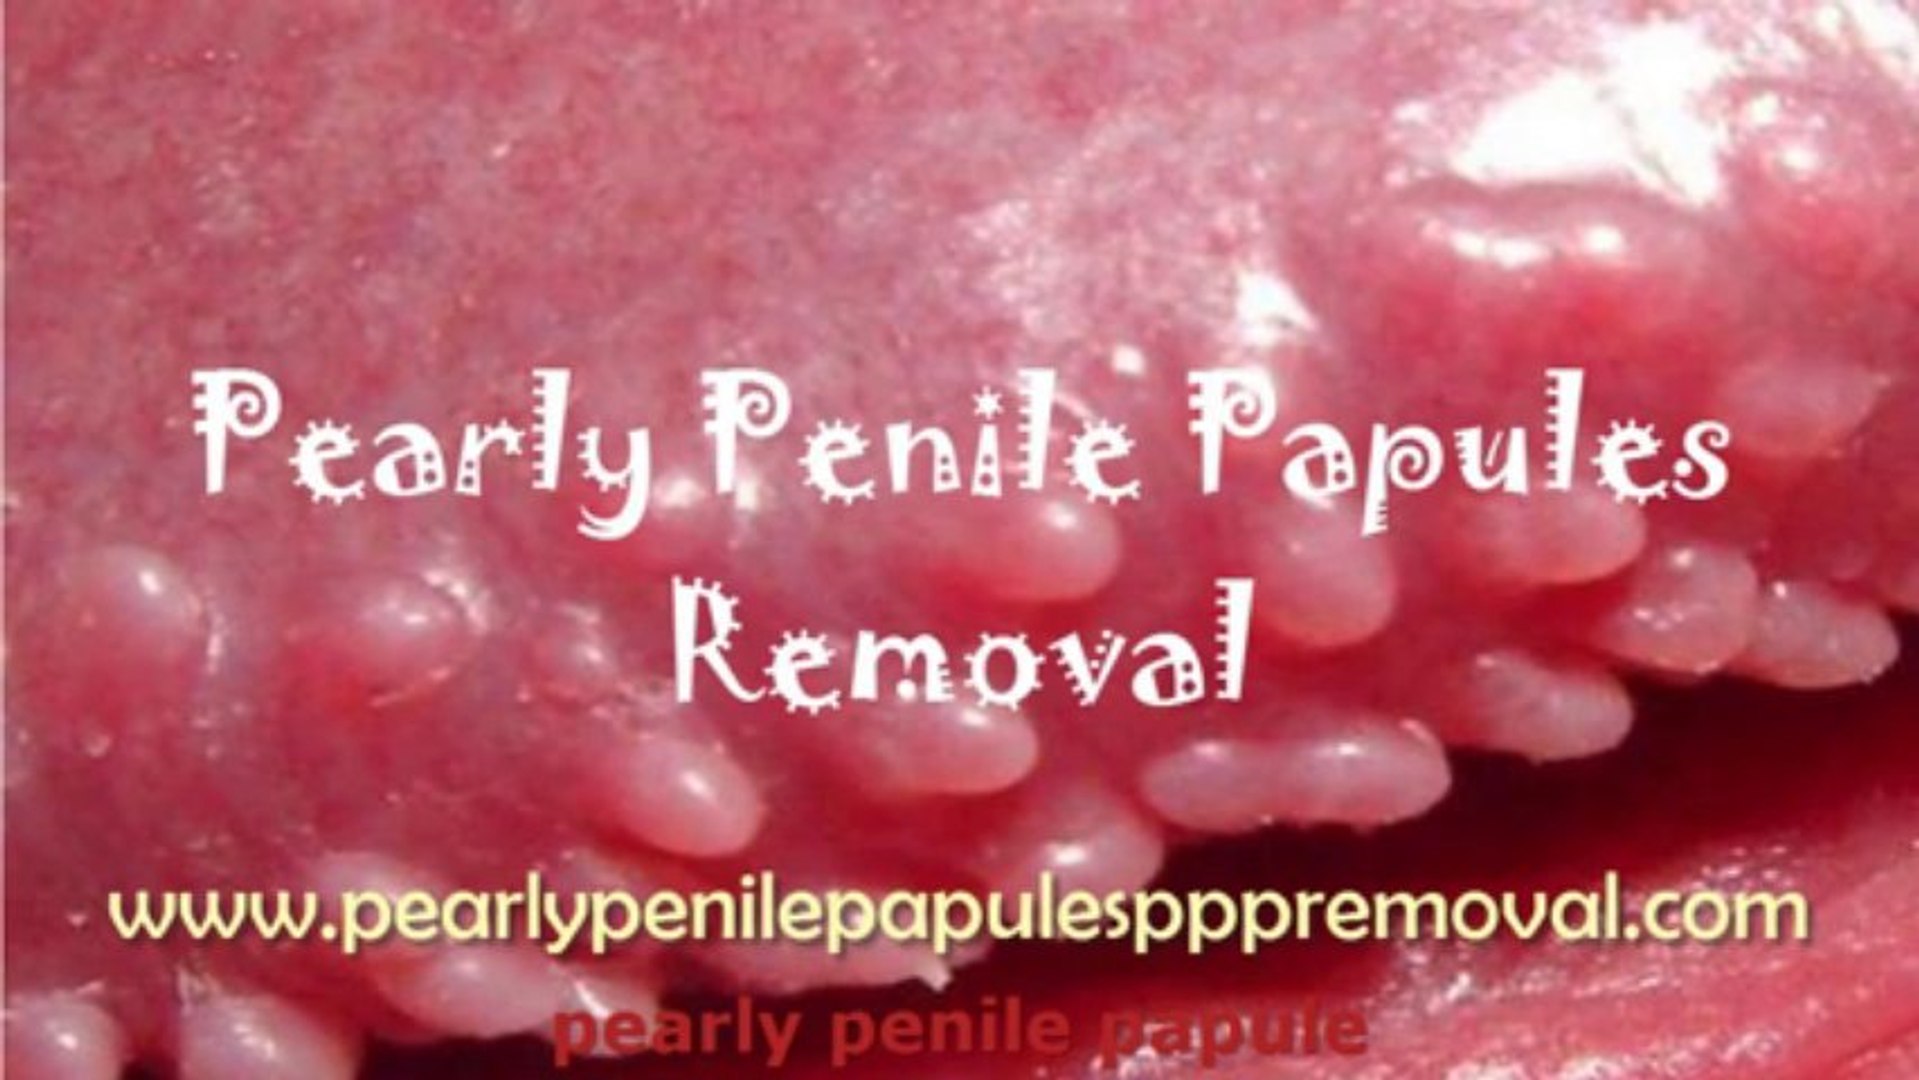 Penile papules are what Pearly penile